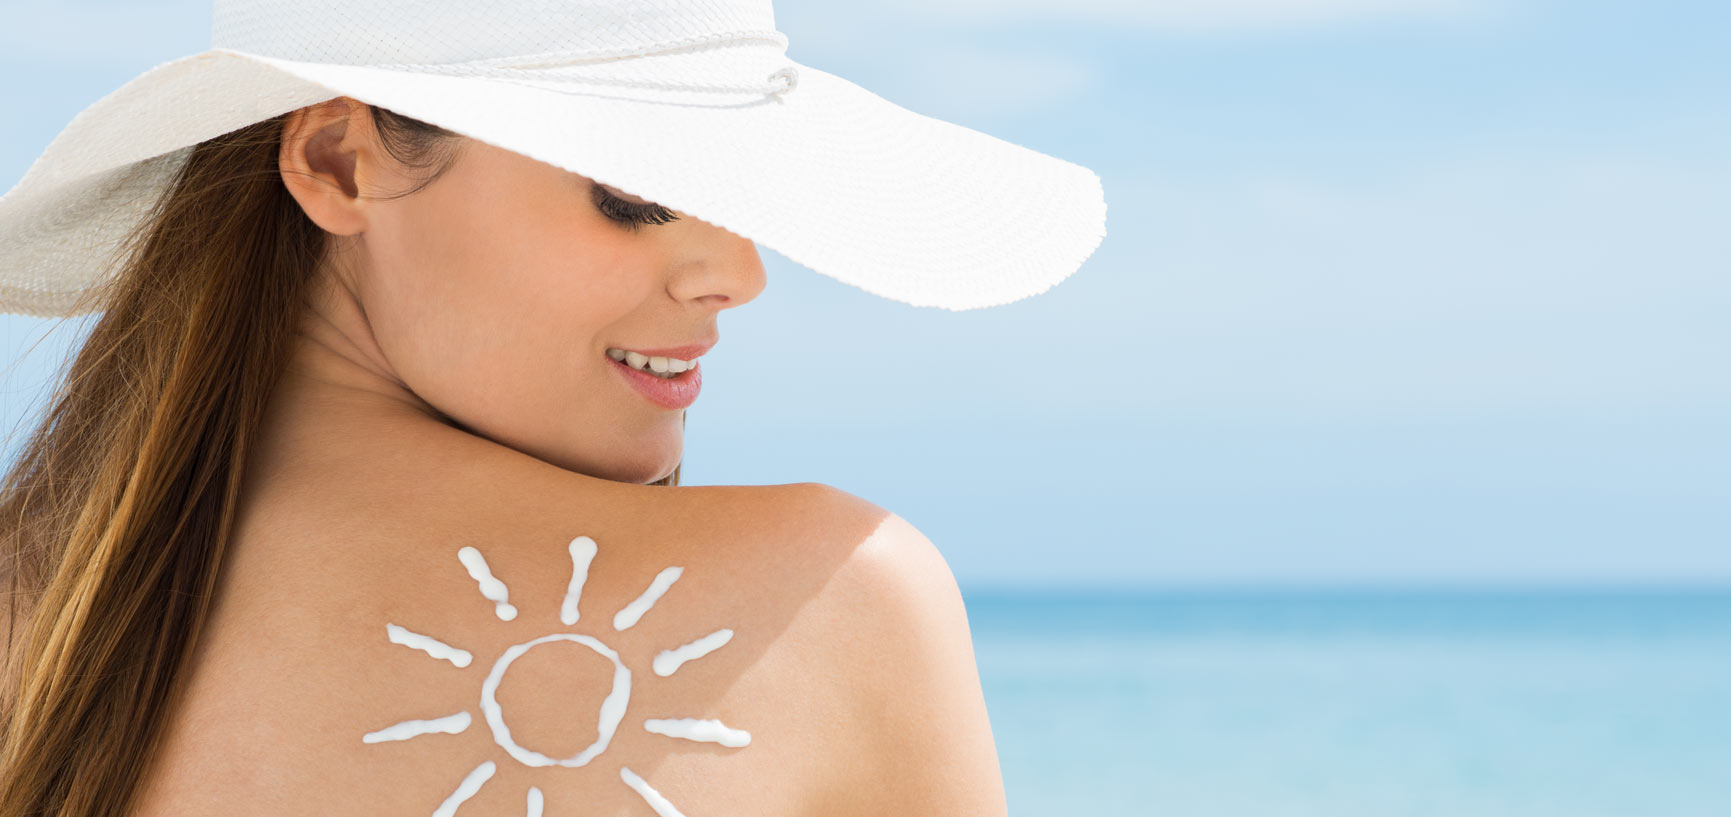 Soothing Natural Remedies For Relieving Sunburn